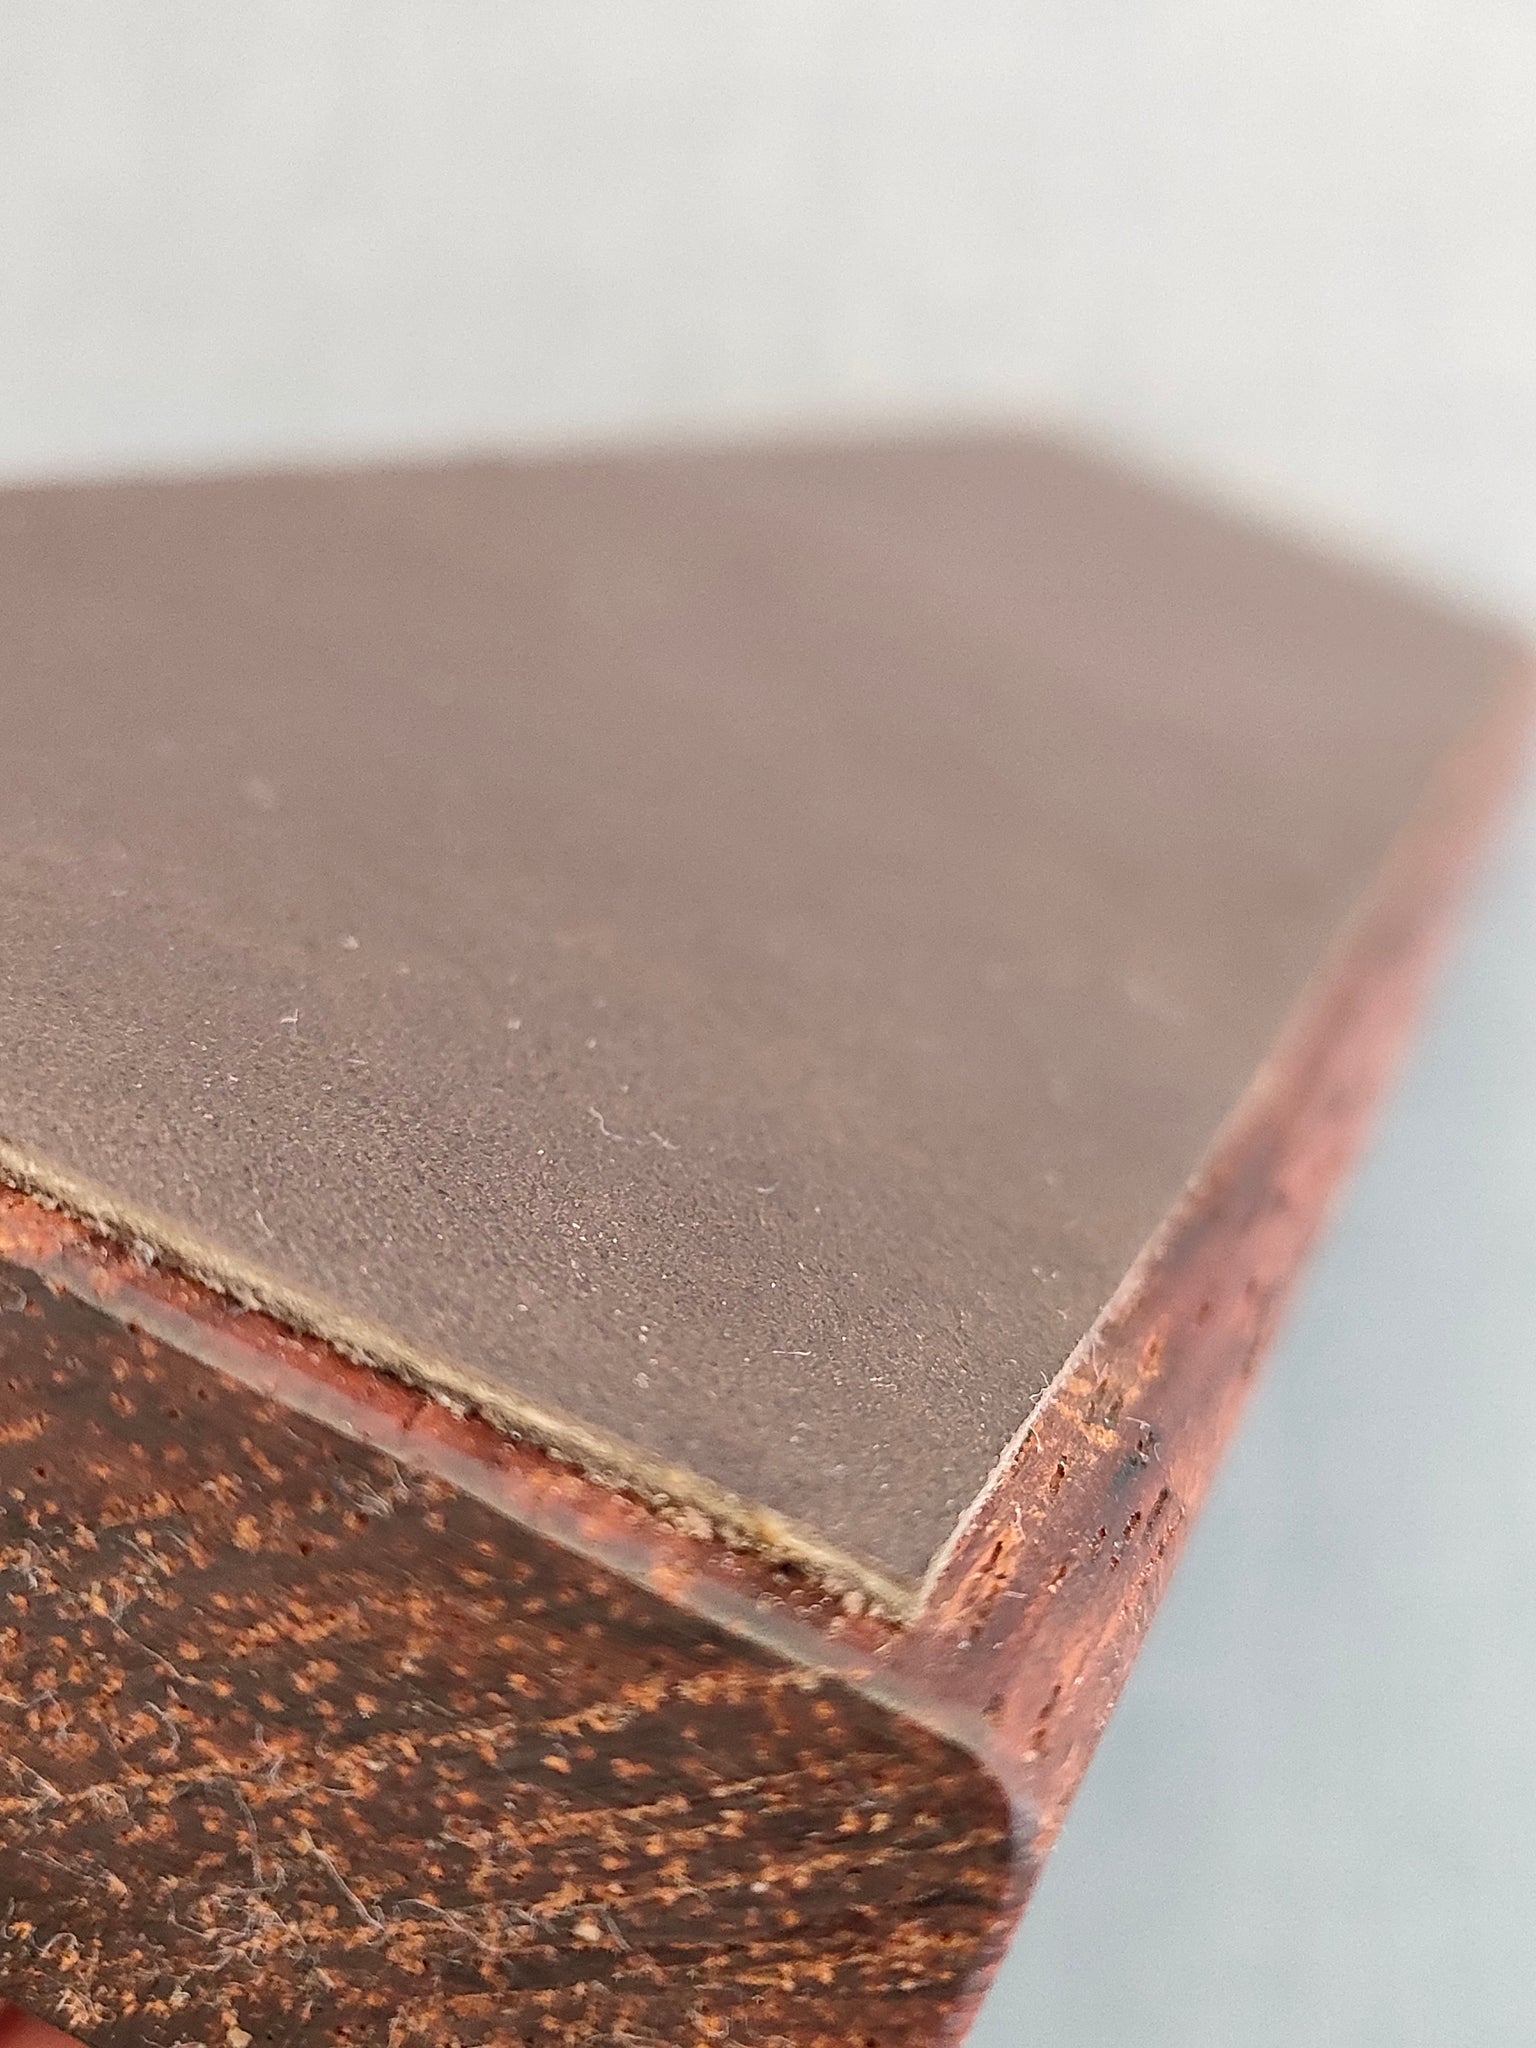 Leather strop